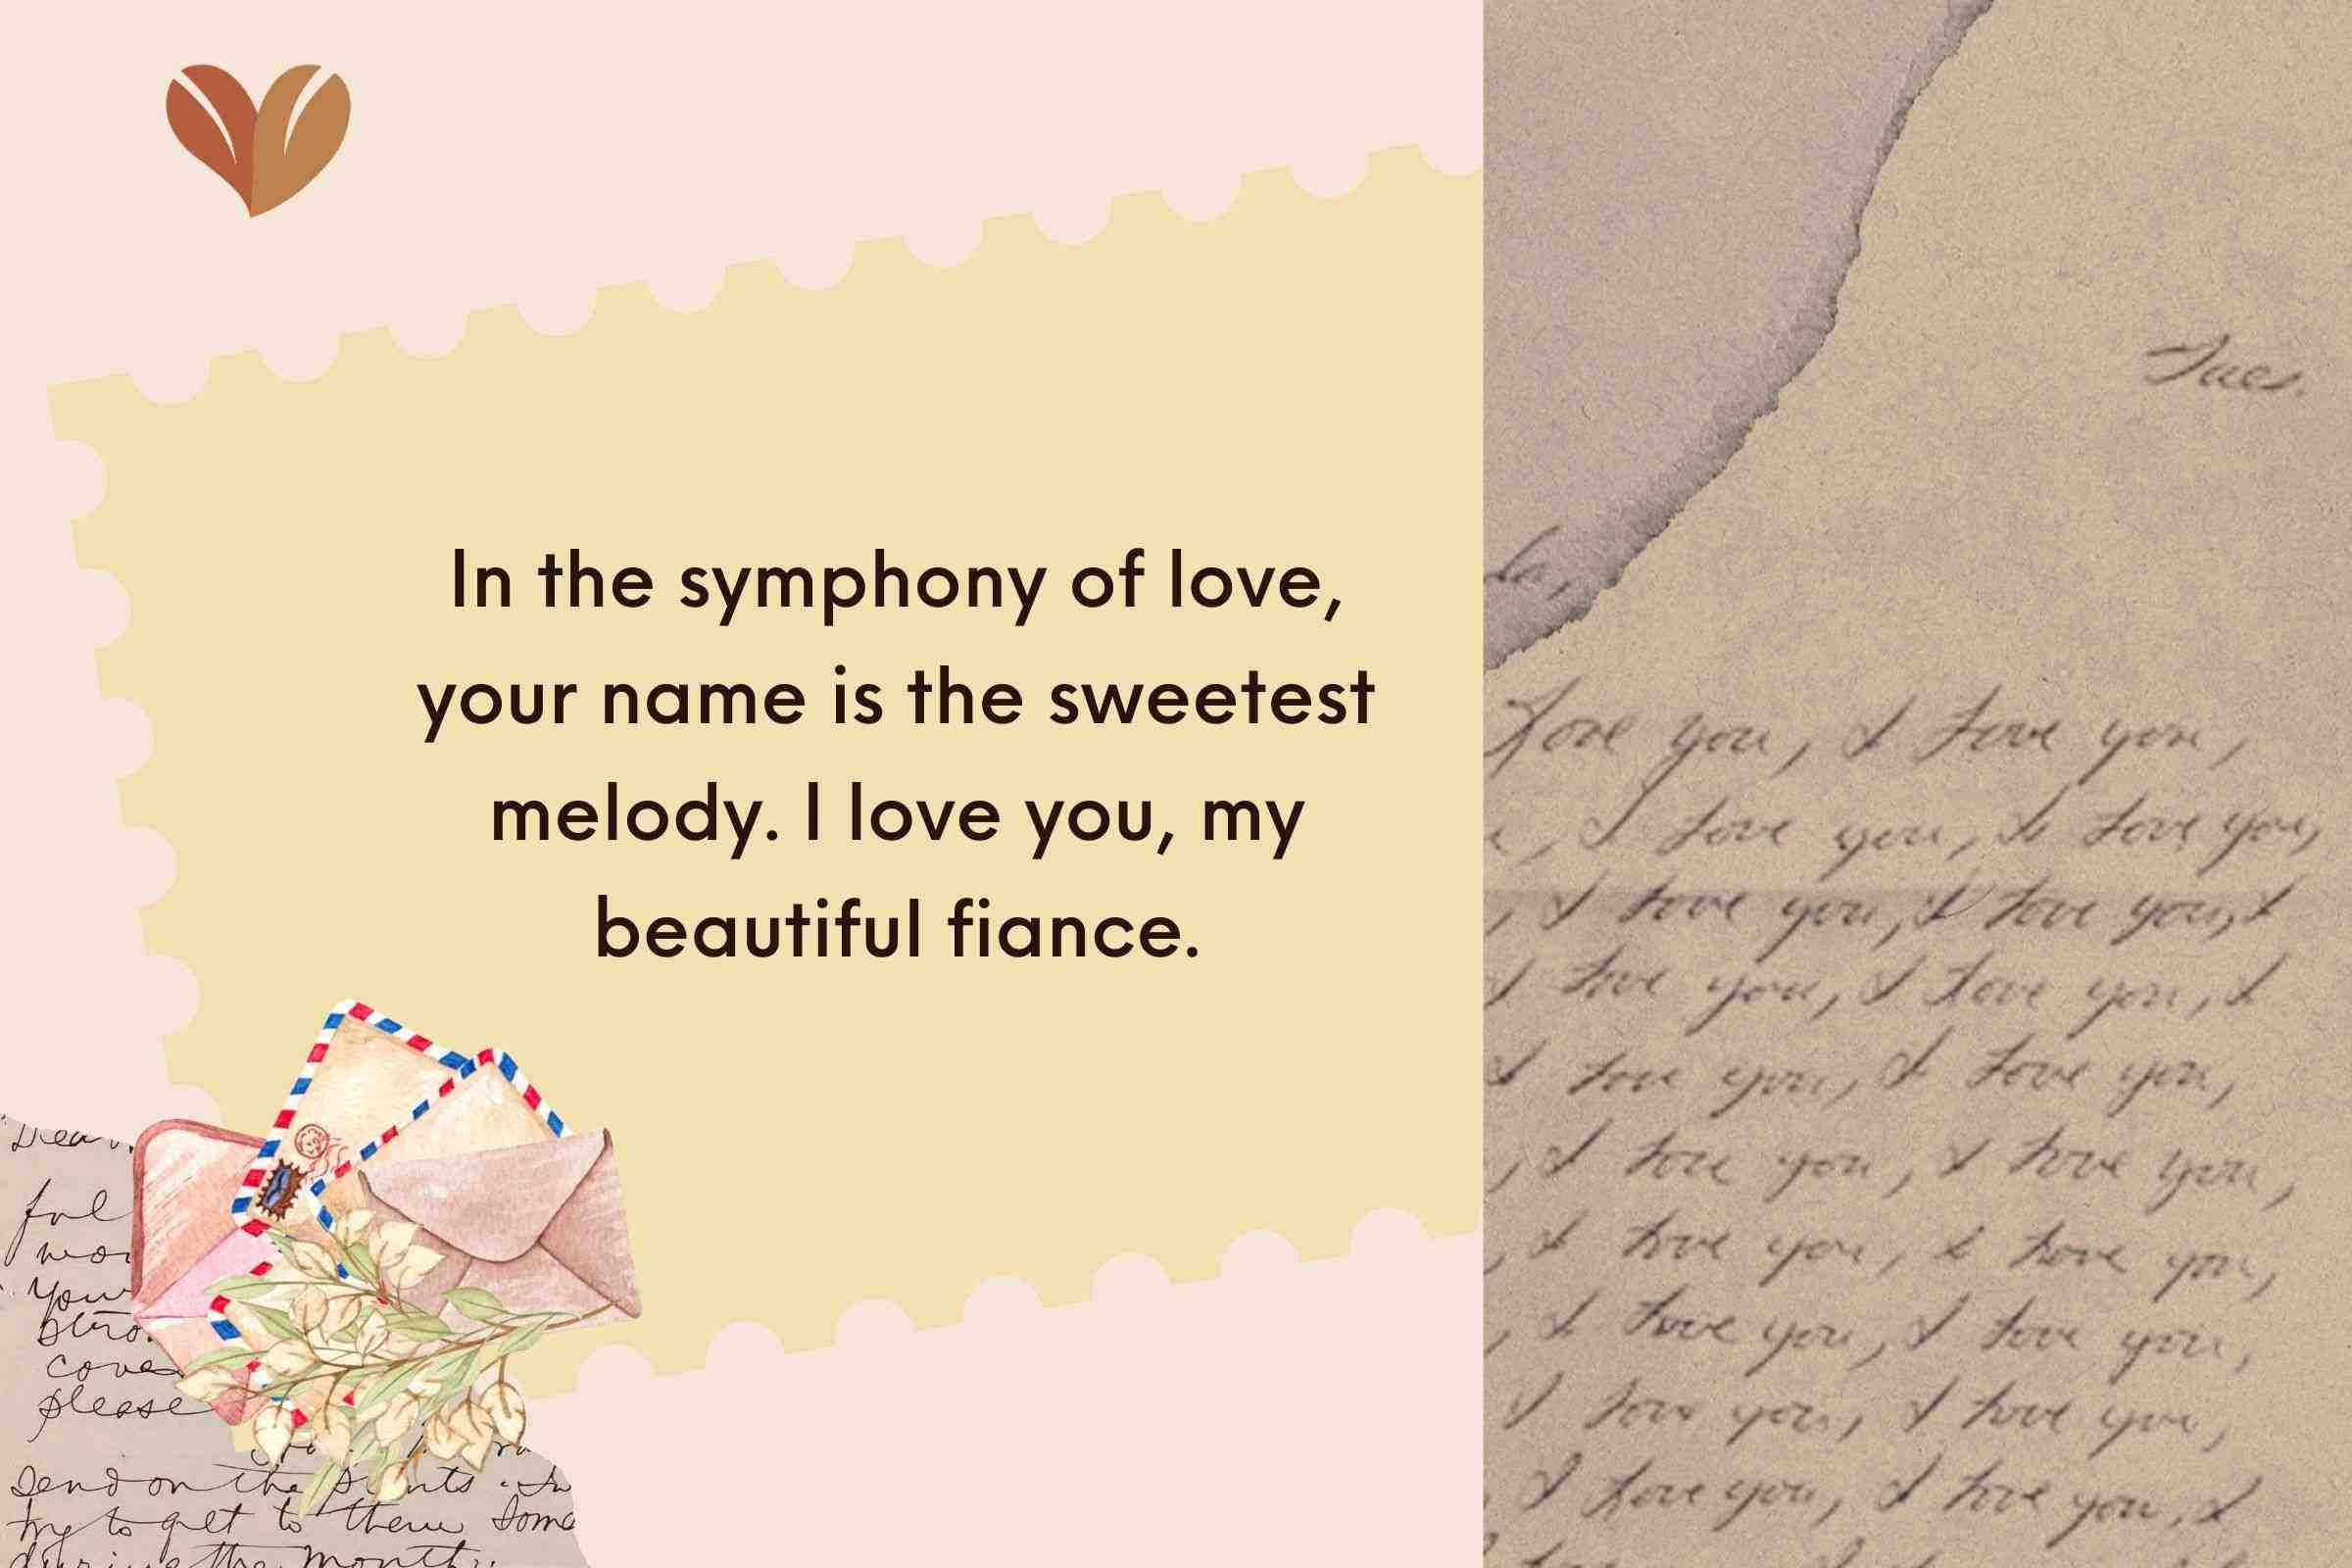 In the symphony of love, your name is the sweetest melody. I love you, my beautiful fiance.